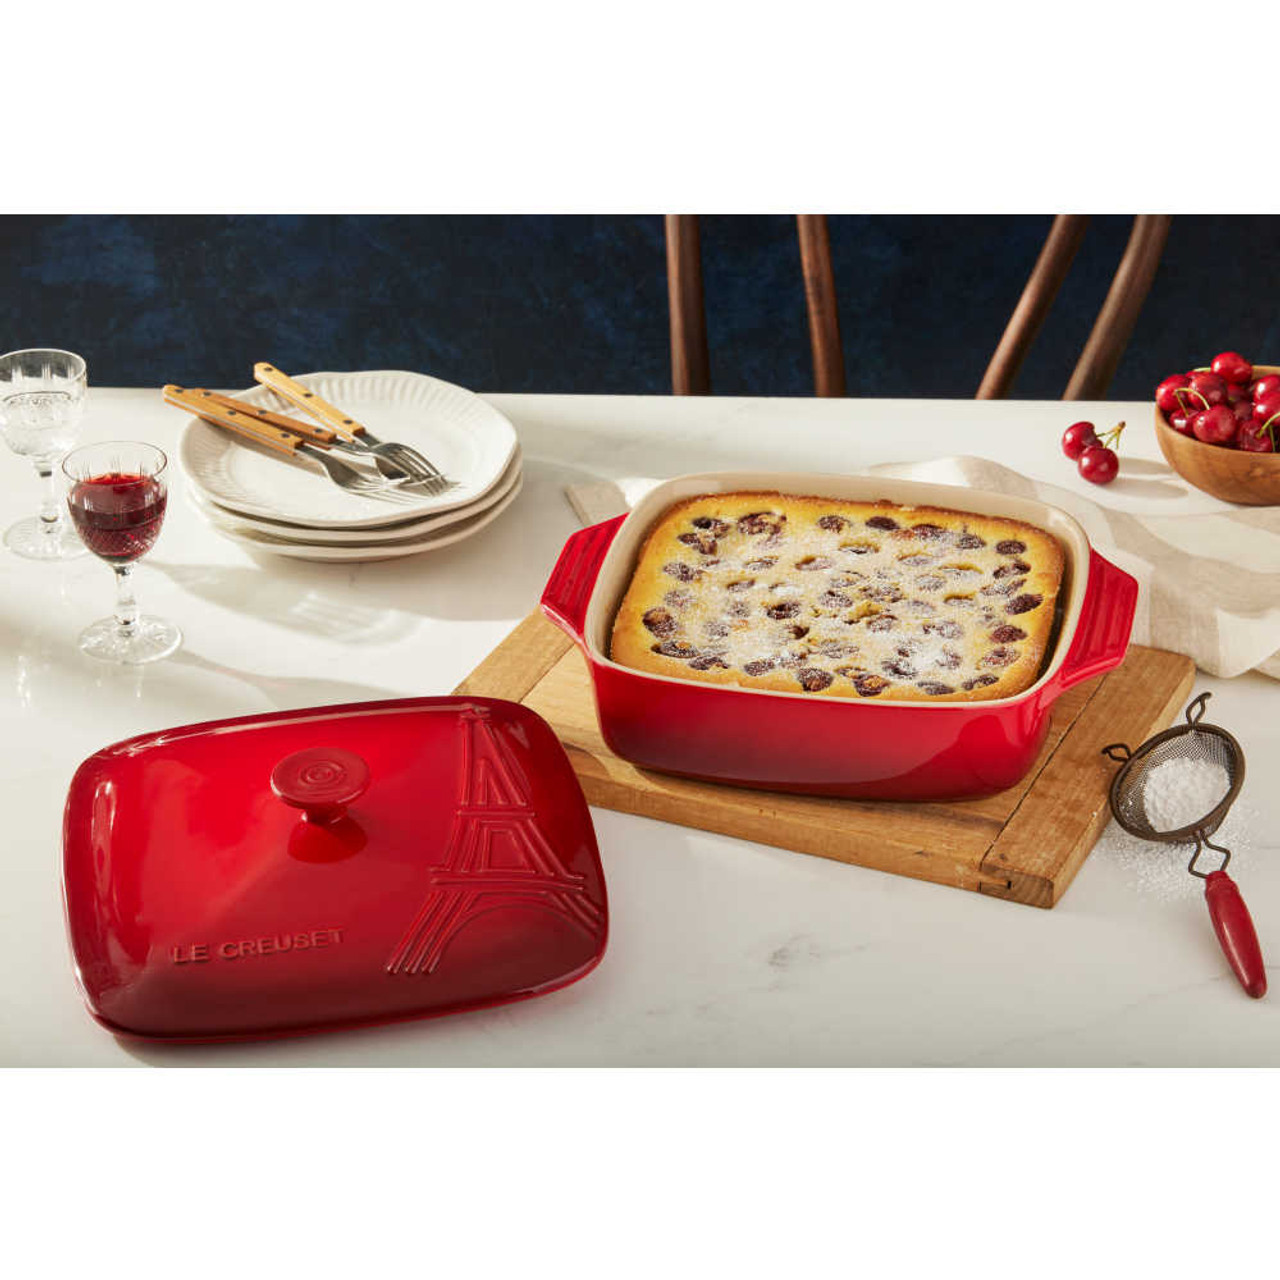 https://cdn11.bigcommerce.com/s-hccytny0od/images/stencil/1280x1280/products/4882/20324/Le_Creuset_Eiffel_Tower_Collection_Signature_Square_Casserole_in_Cerise__42012.1657306673.jpg?c=2?imbypass=on